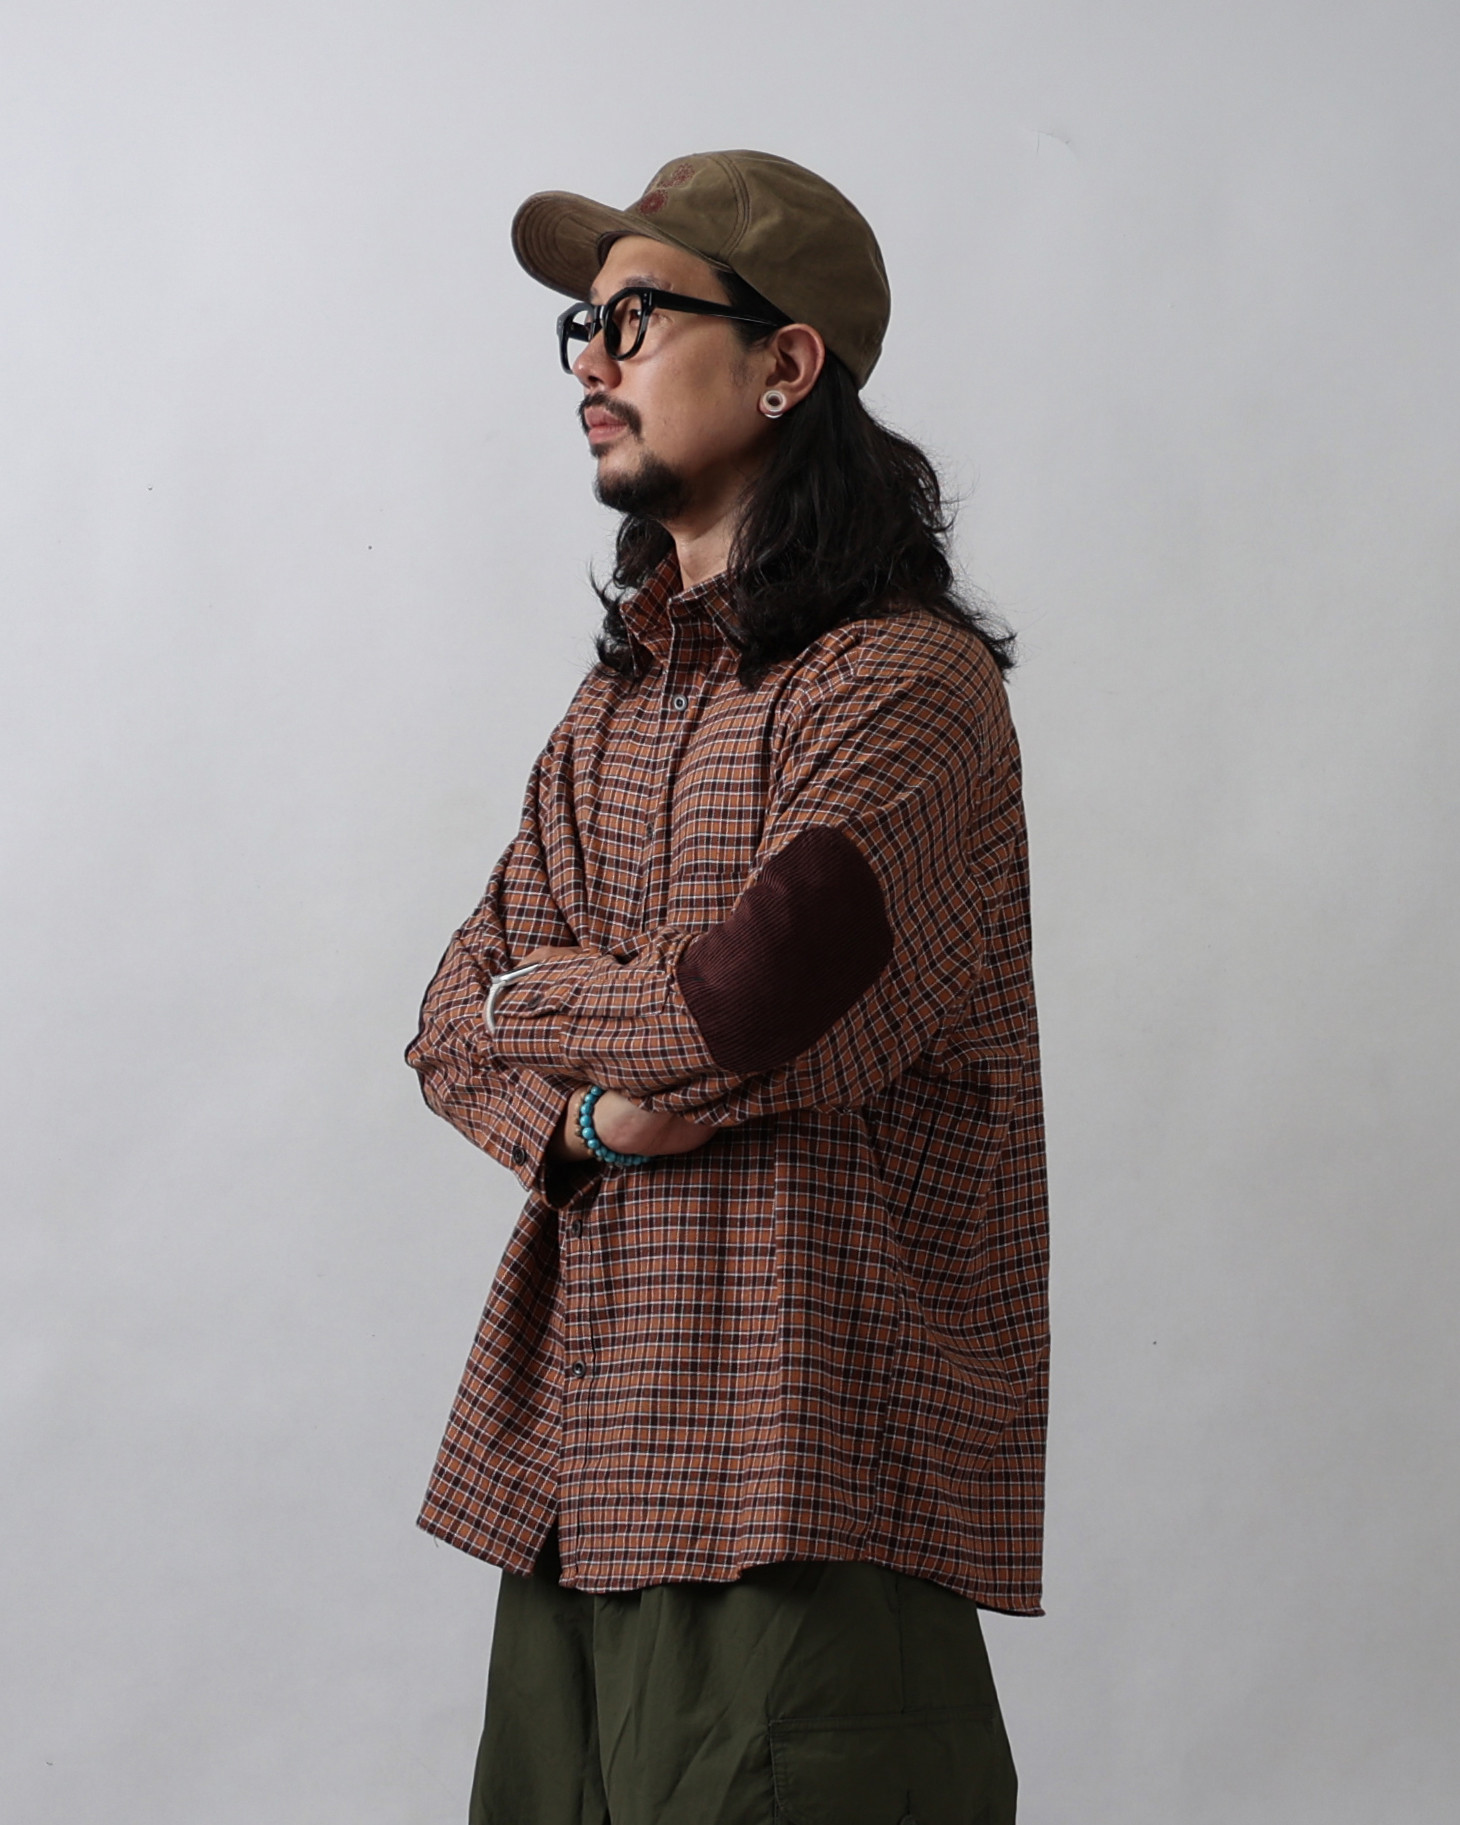 LIBERT RAY Patched Over Check Shirts (Navy/Green/Camel/Brown) - 6차 리오더 (2/29 배송예정)